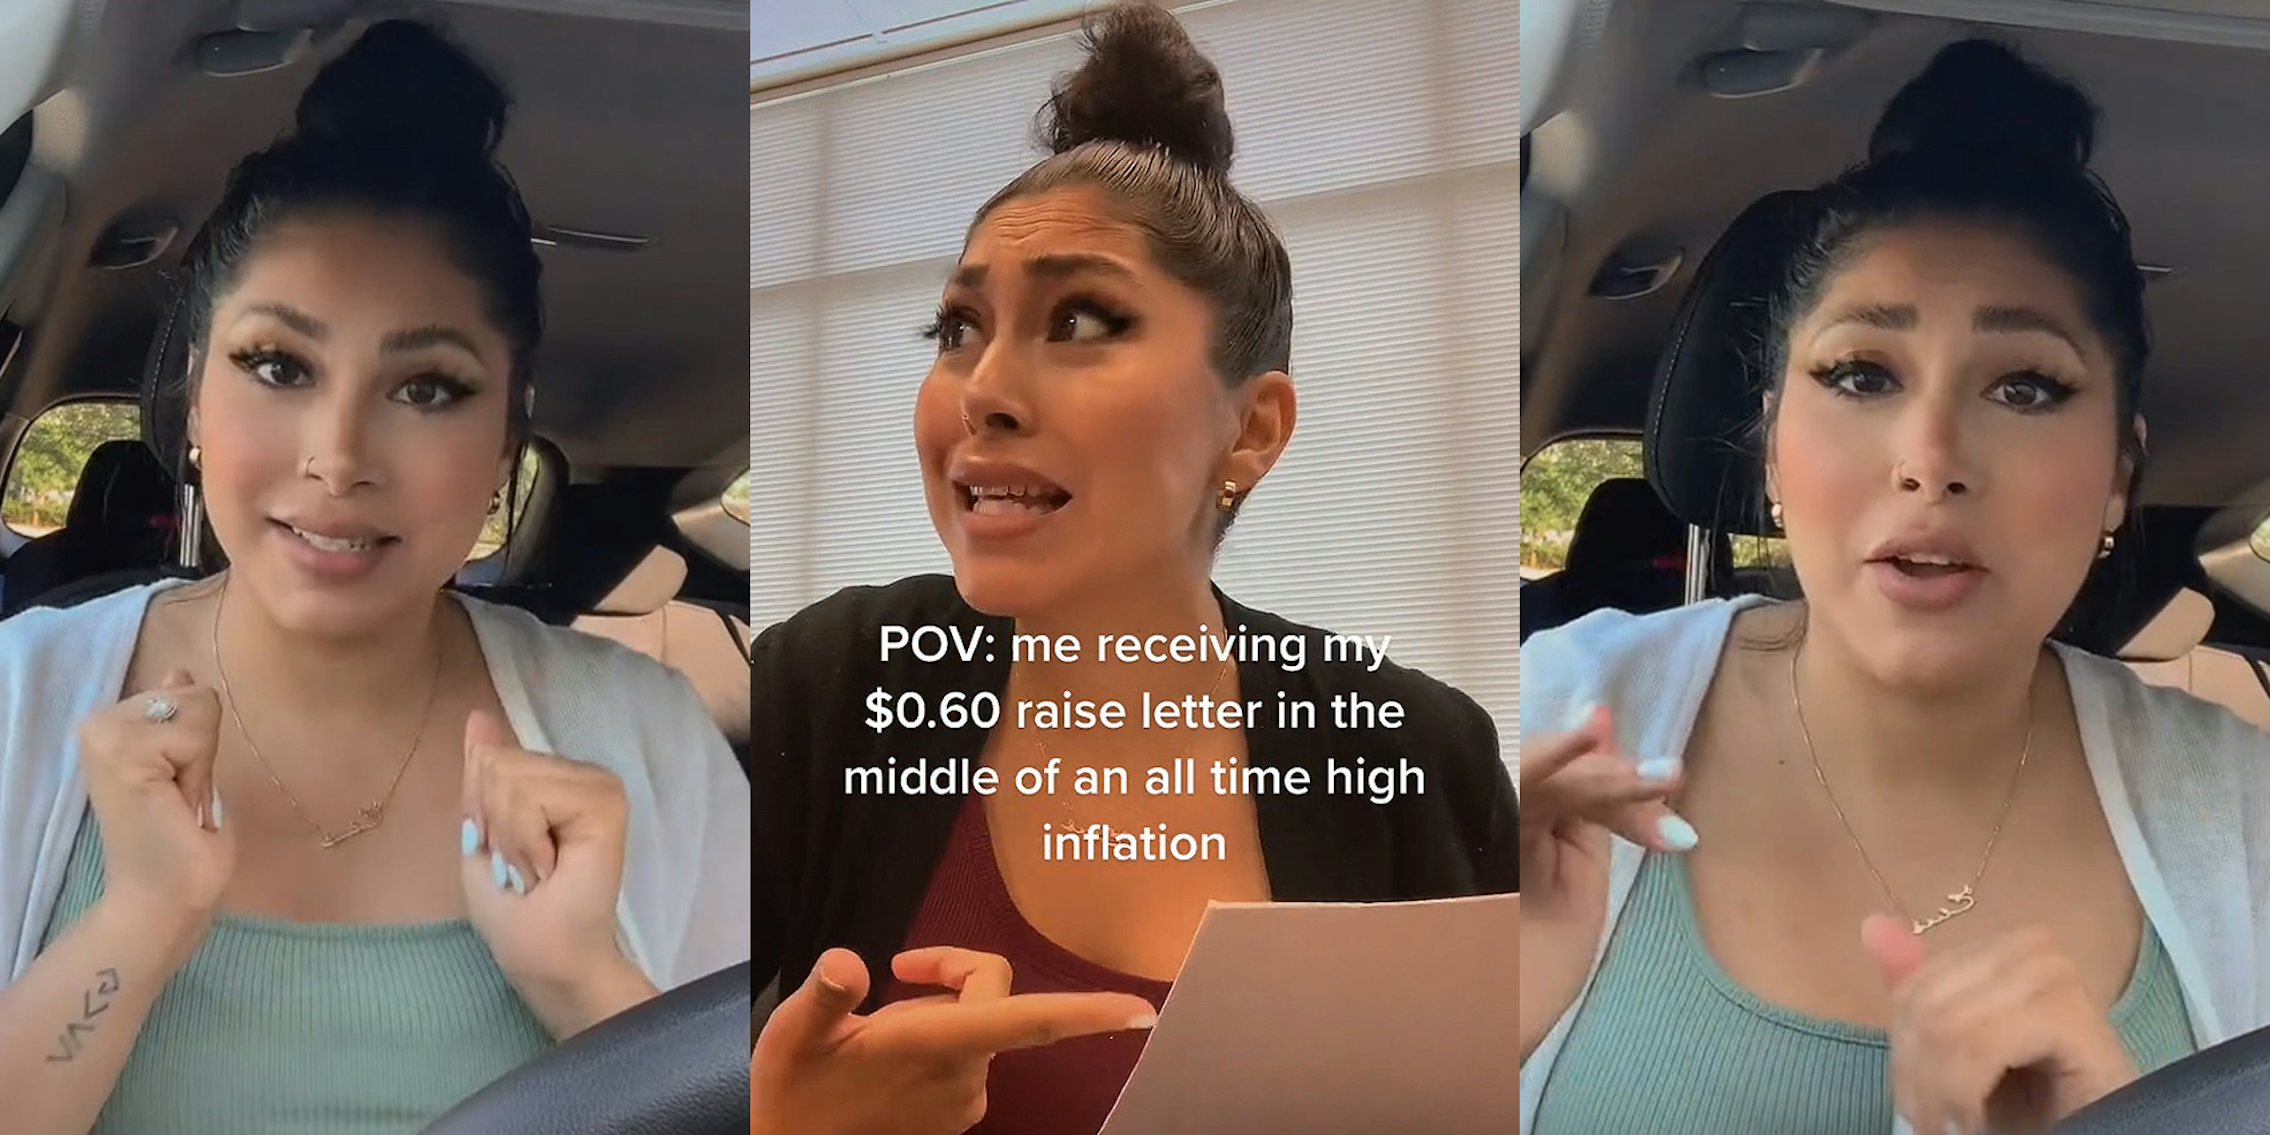 woman speaking in car hands up (l) woman holding paper pointing to it caption 'POV: me receiving my $0.60 raise letter in the middle of an all time high inflation' (c) woman speaking in car hands at different levels (r)